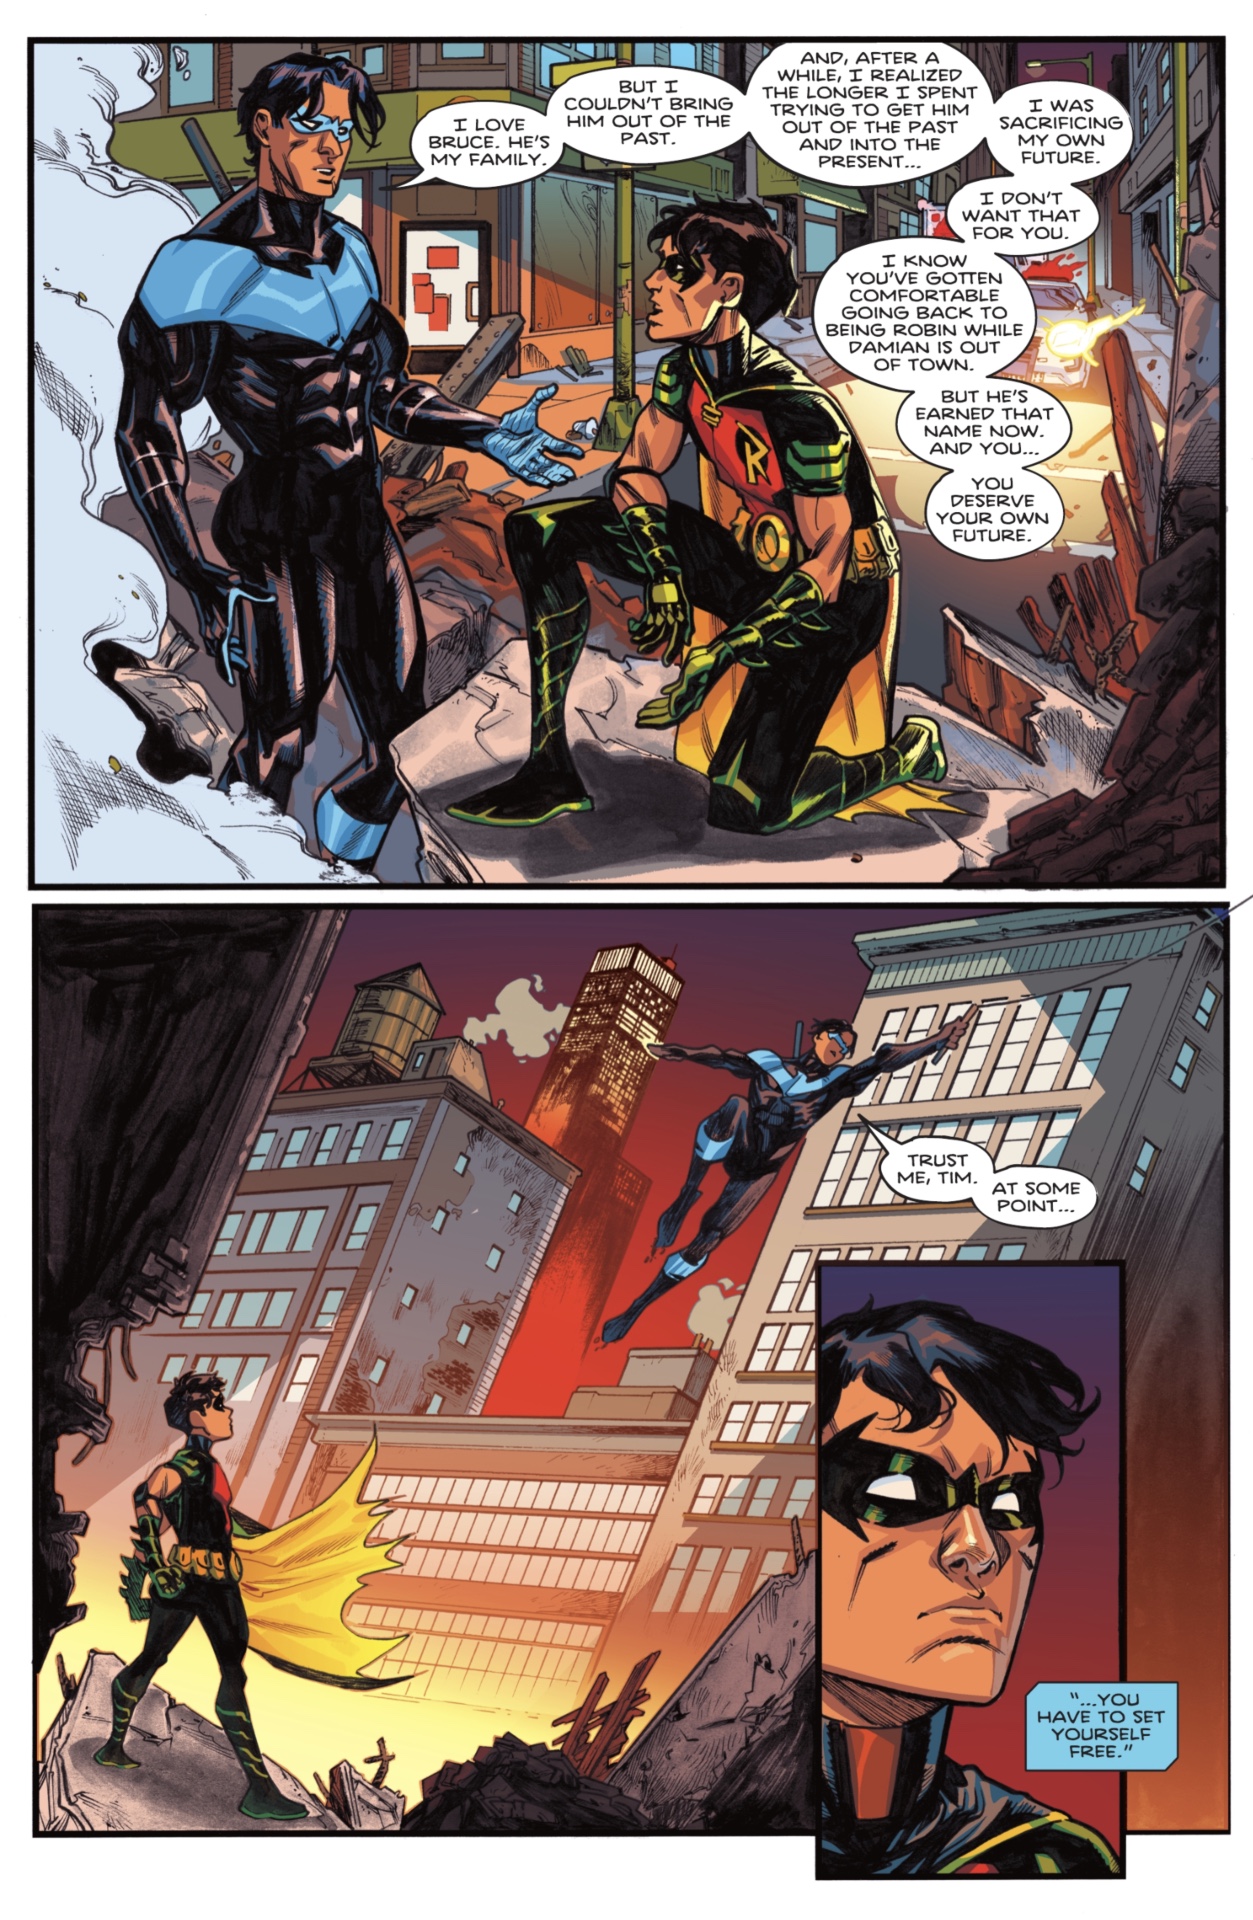 Batman has the perfect response to Tim Drake/Robin coming out in Urban ...